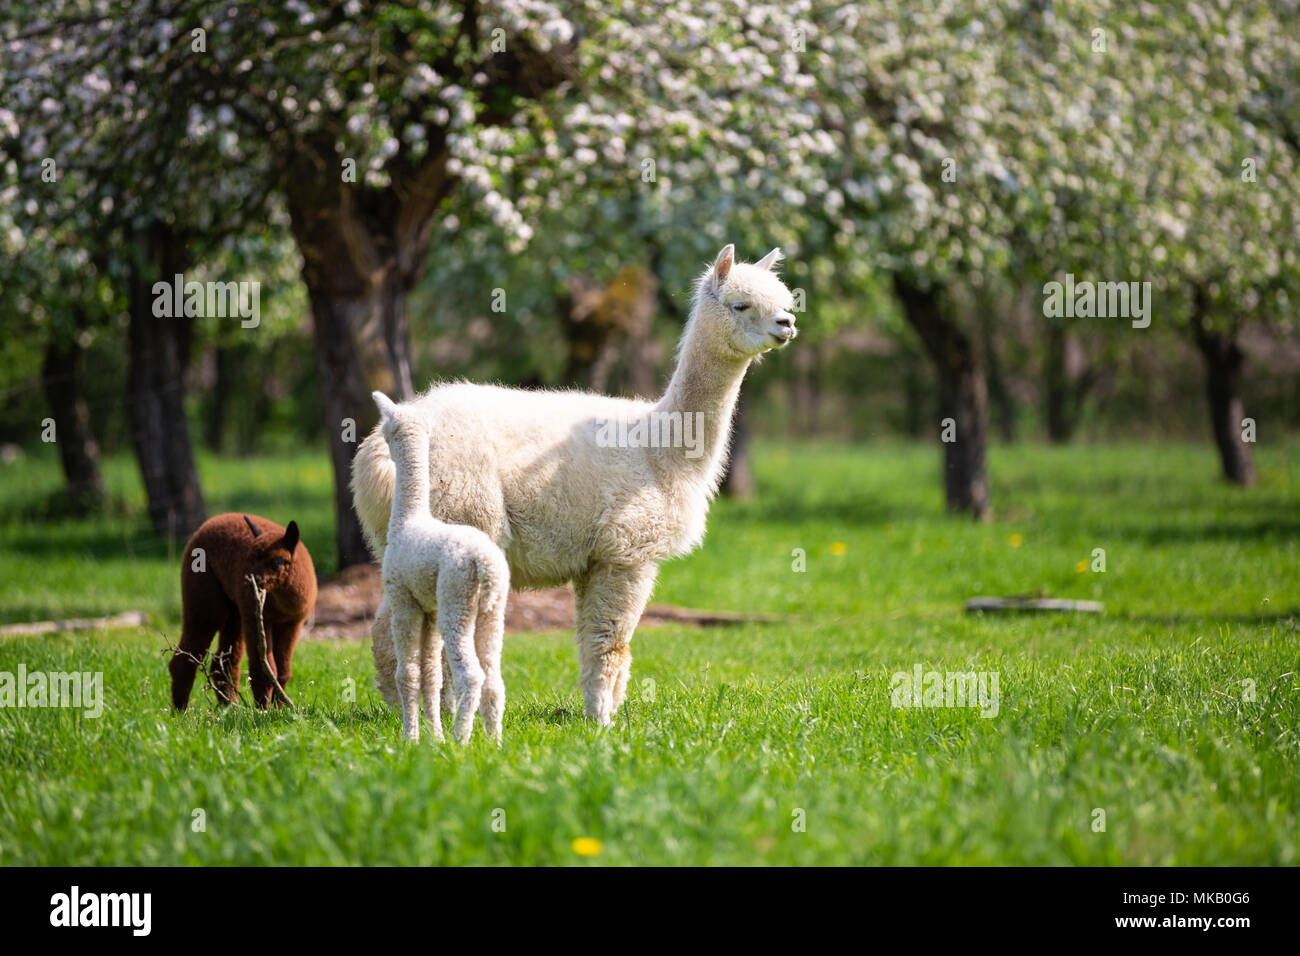 White Alpaca with offspring, South American mammal Stock Photo